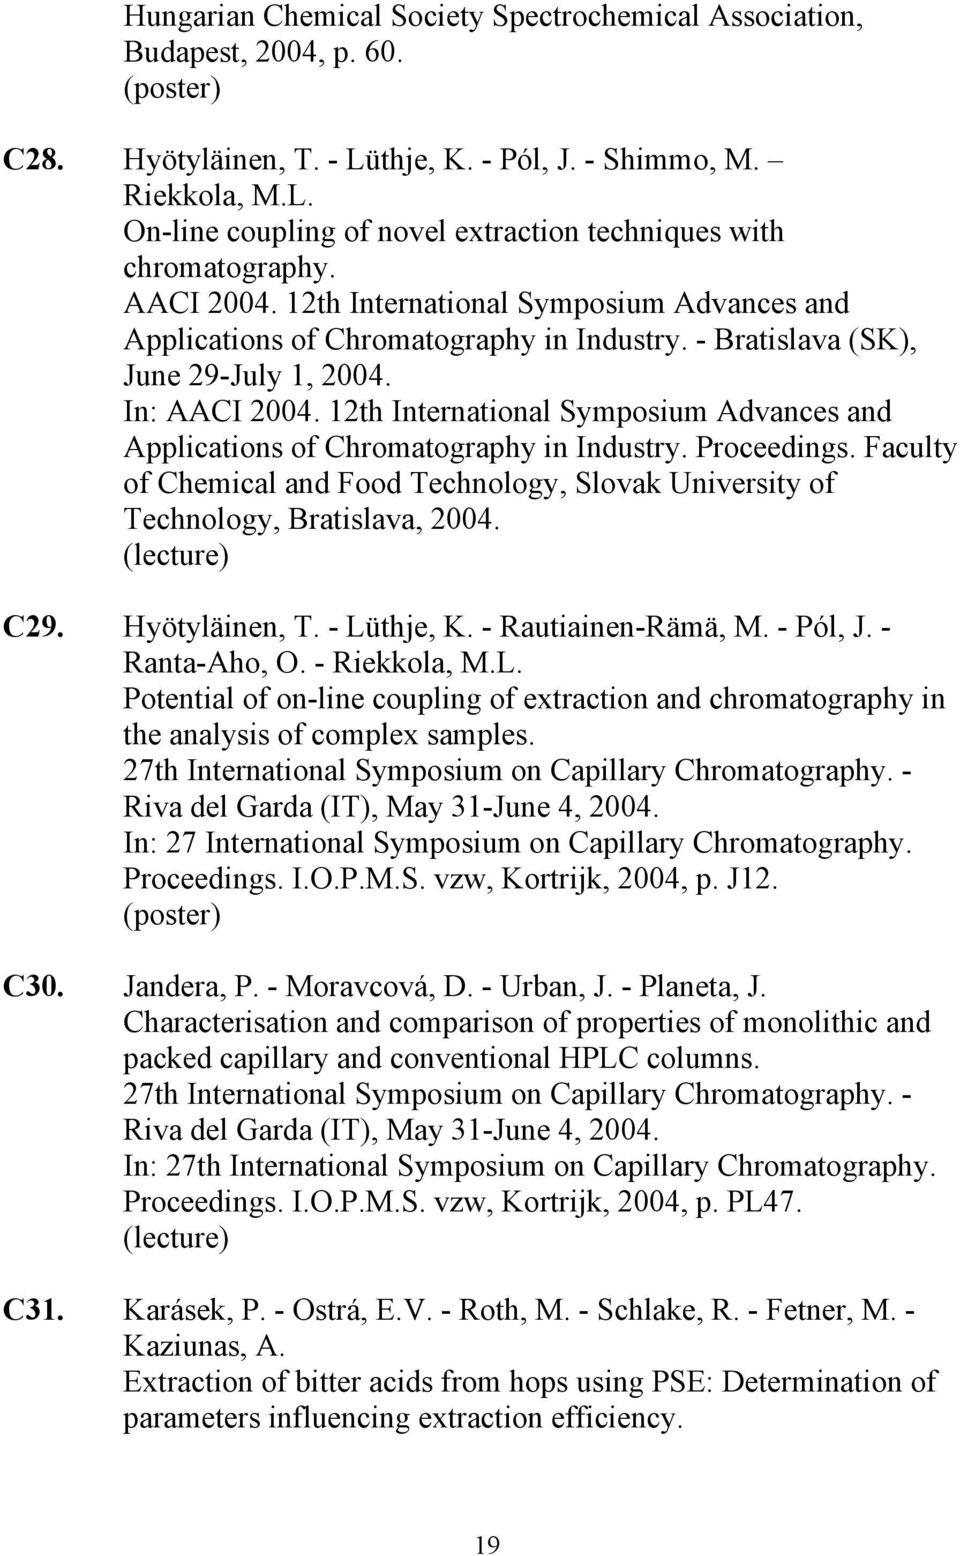 12th International Symposium Advances and Applications of Chromatography in Industry. Proceedings. Faculty of Chemical and Food Technology, Slovak University of Technology, Bratislava, 2004. C29.